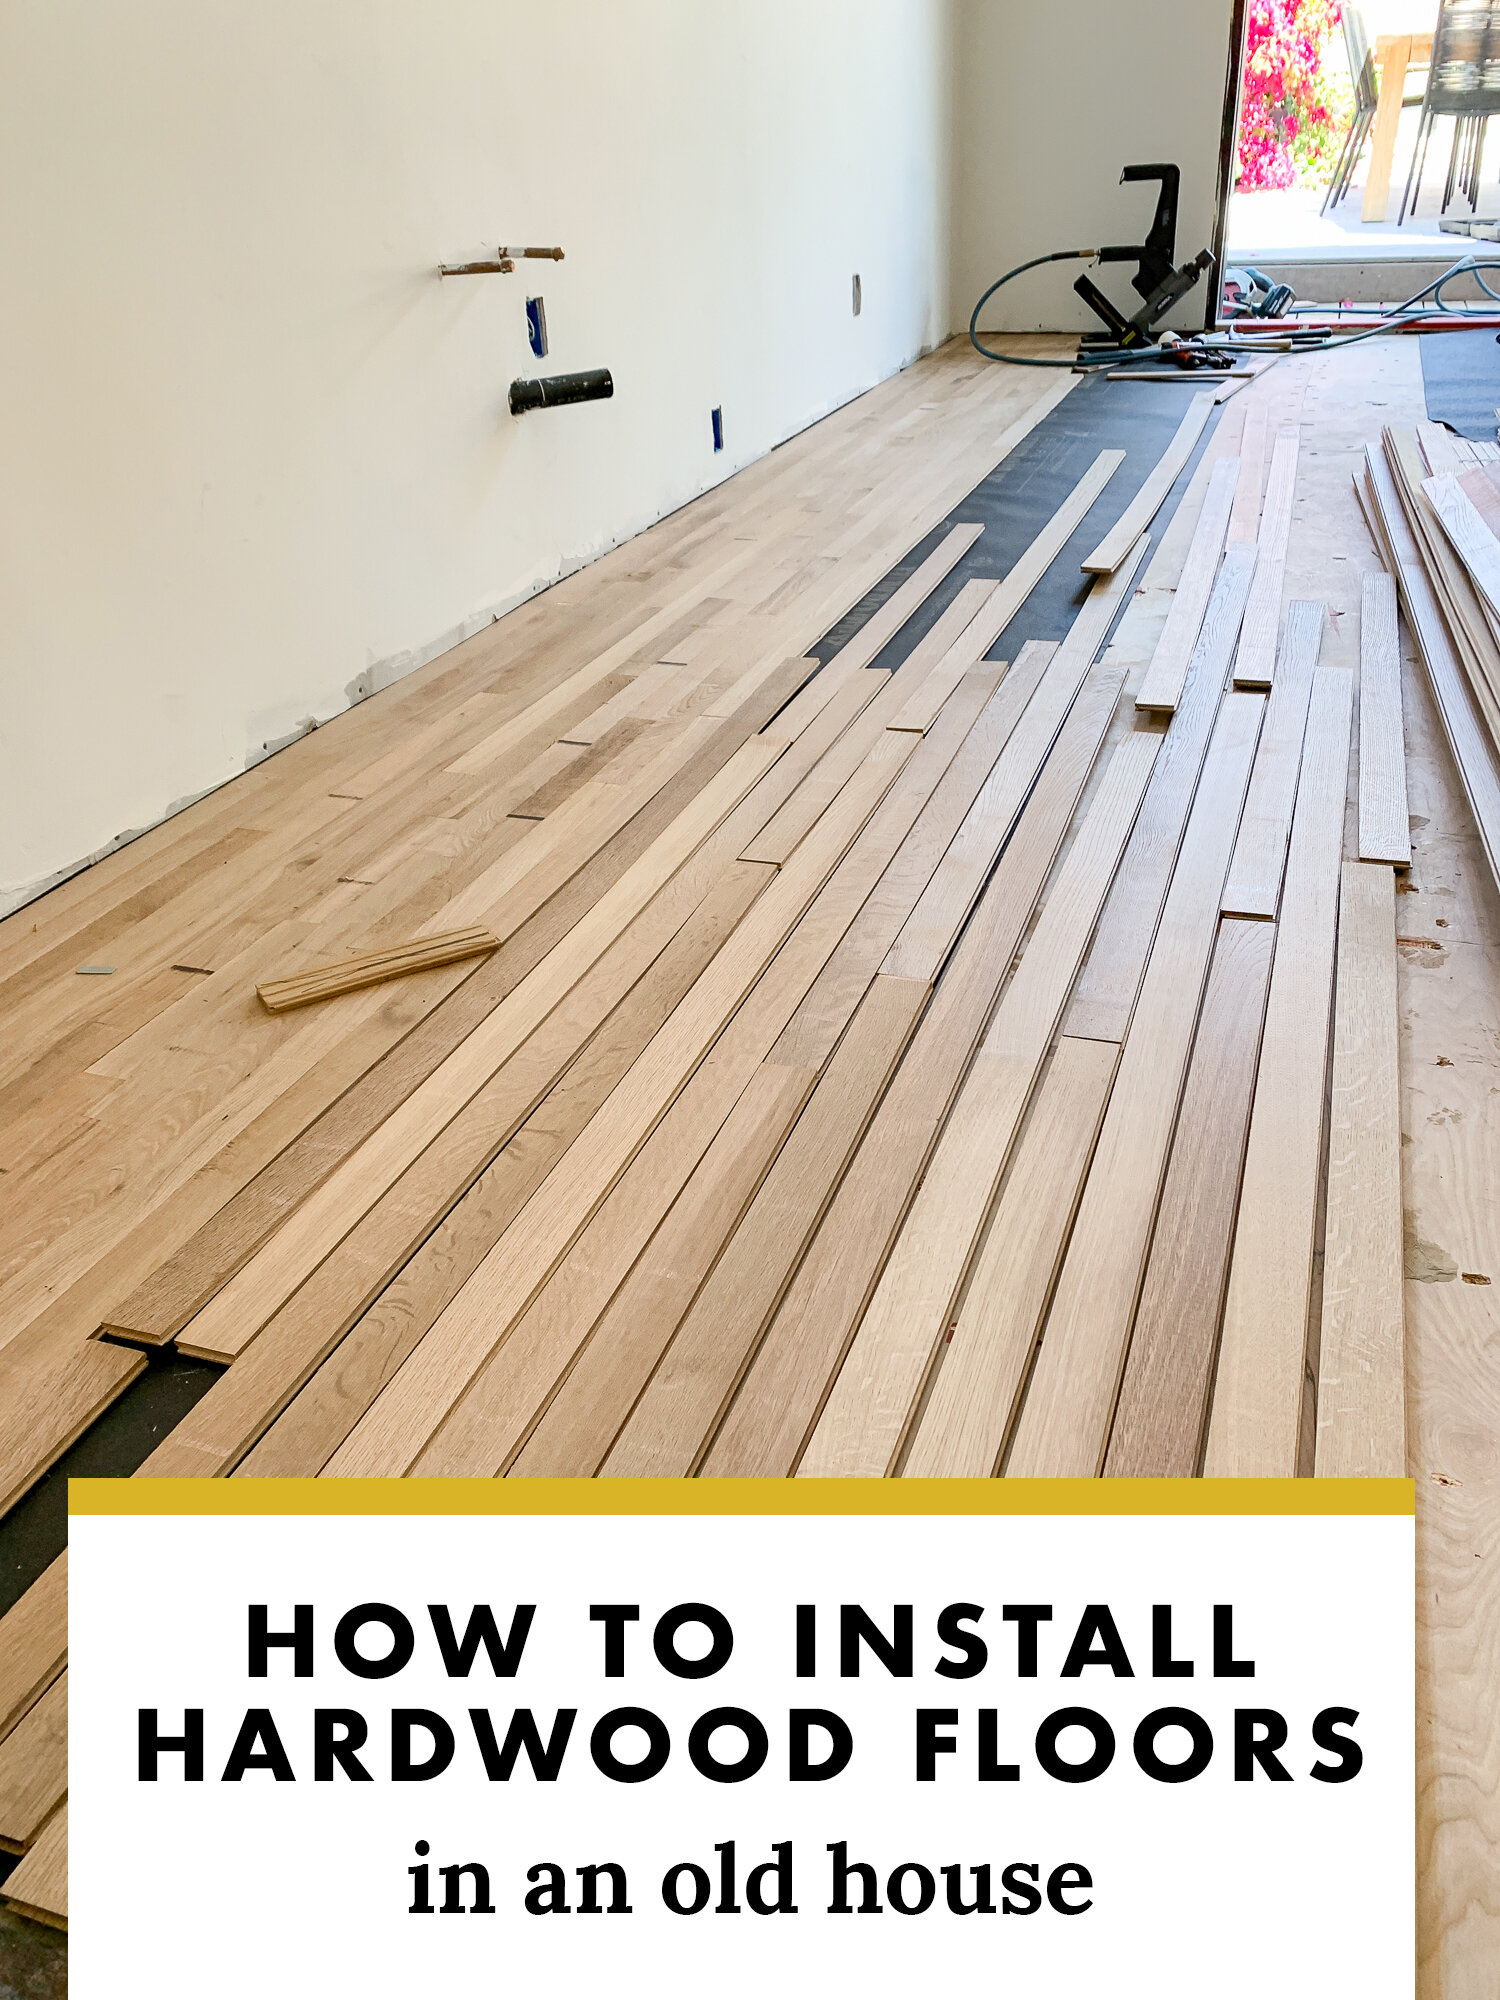 Installing New Hardwood Floors In Our, How Long Does It Take To Install Hardwood Floors